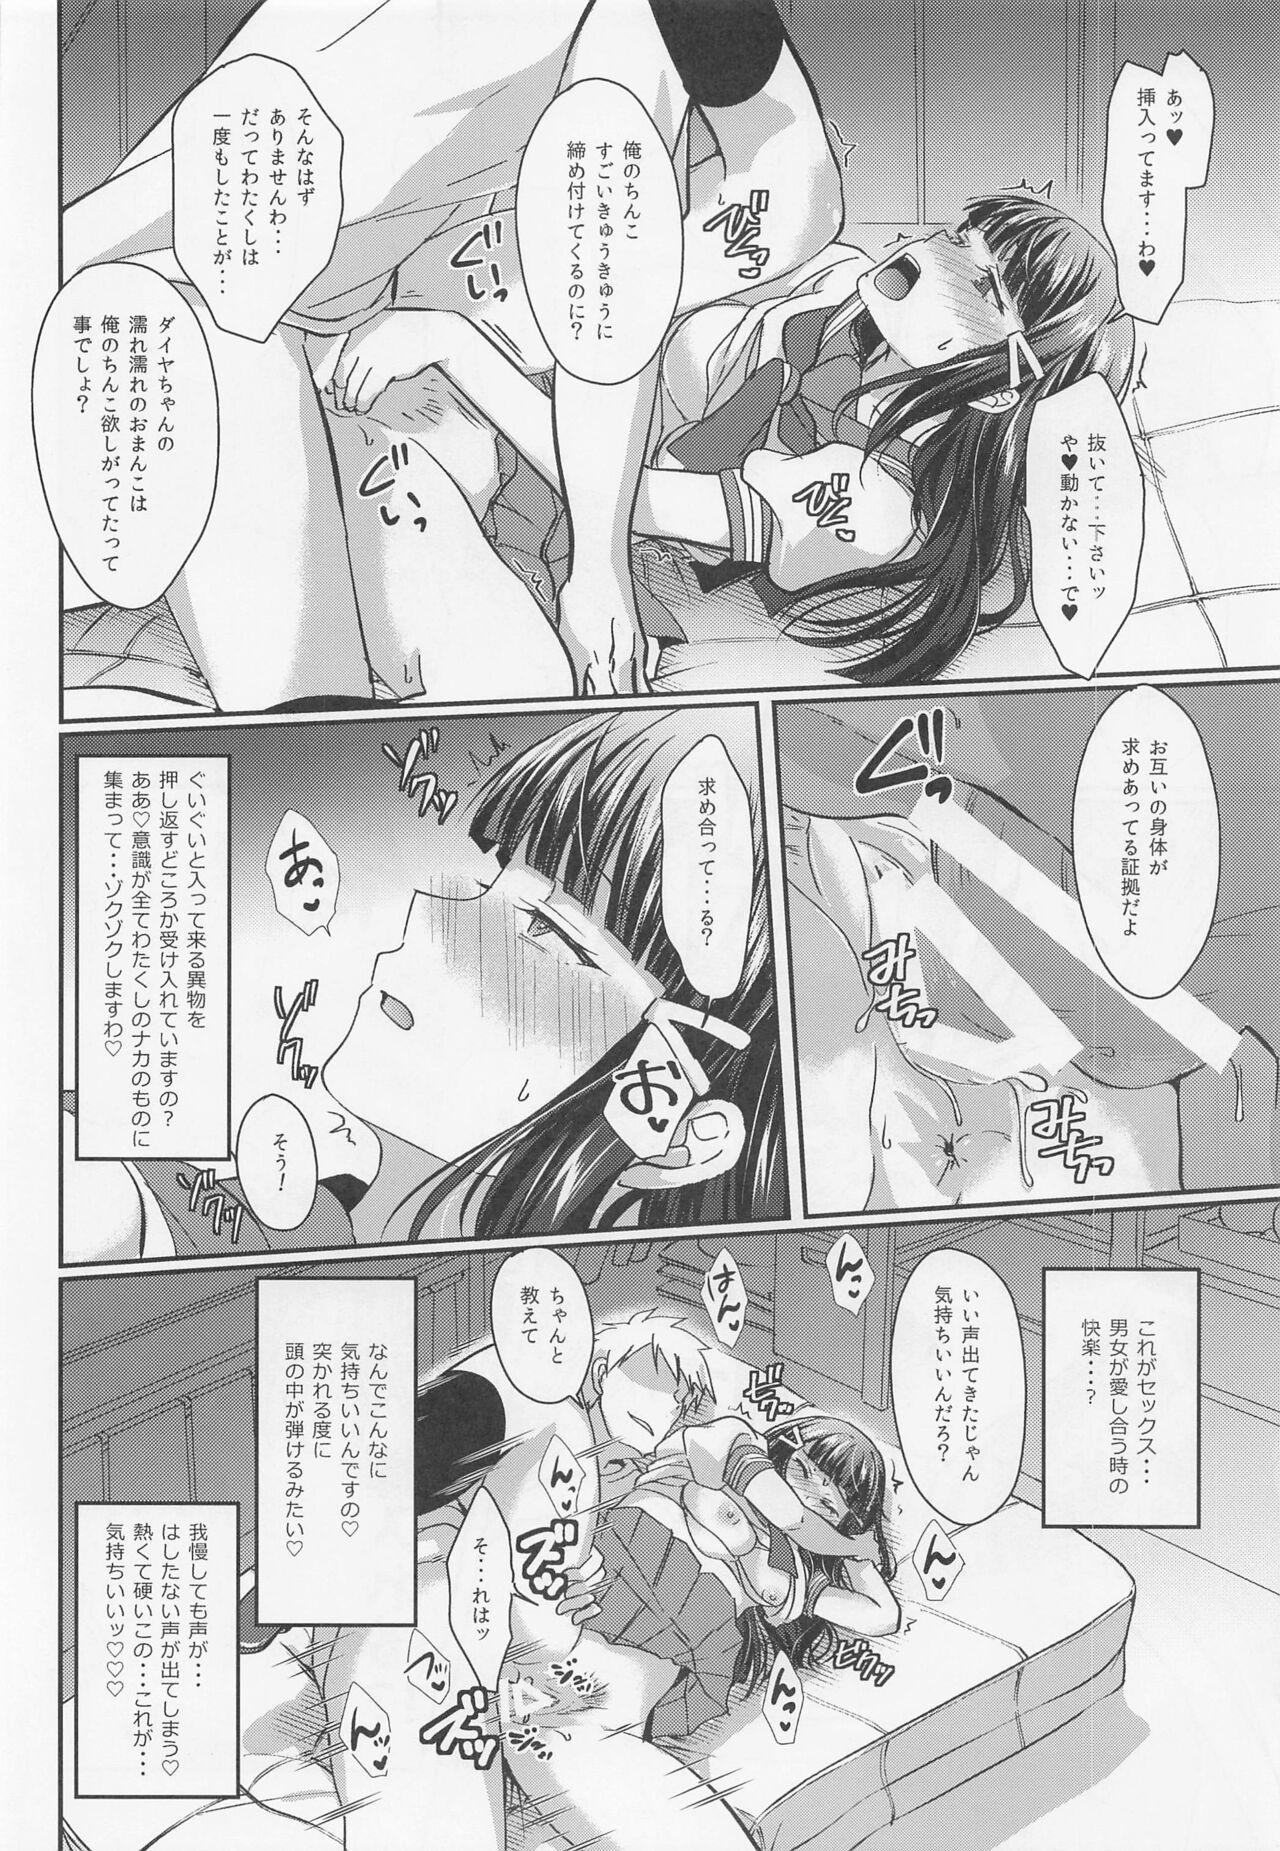 Mas Boiling First Love - Love live sunshine Babe - Page 11